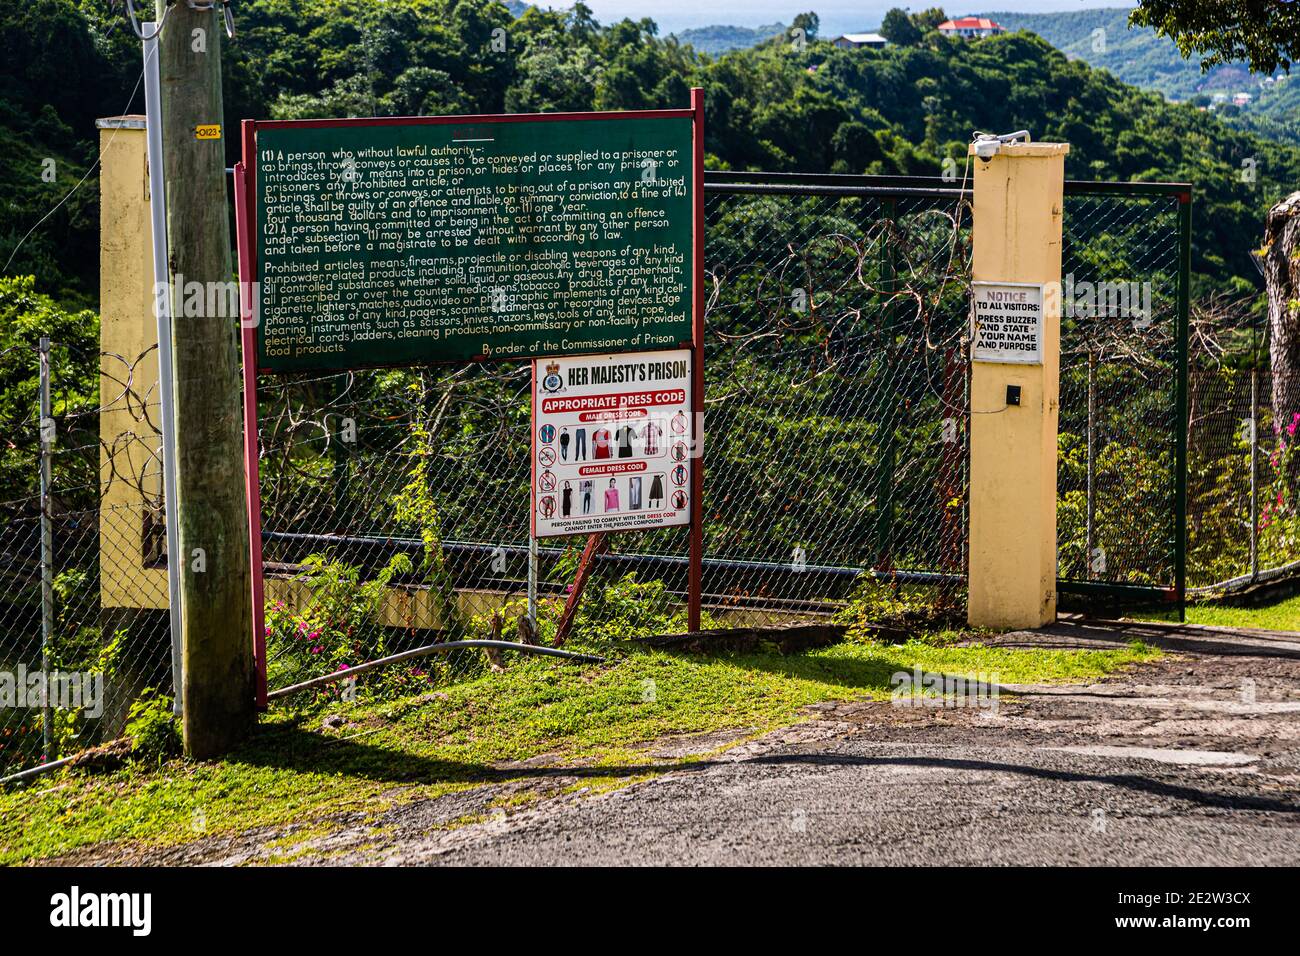 Dress code for visitors to Her Majesty's Prison: cameras and cell phones are prohibited. Richmond Hill Prison (her majesty's inn) is Grenada's State prison in Saint George's, capital city of Grenada Stock Photo